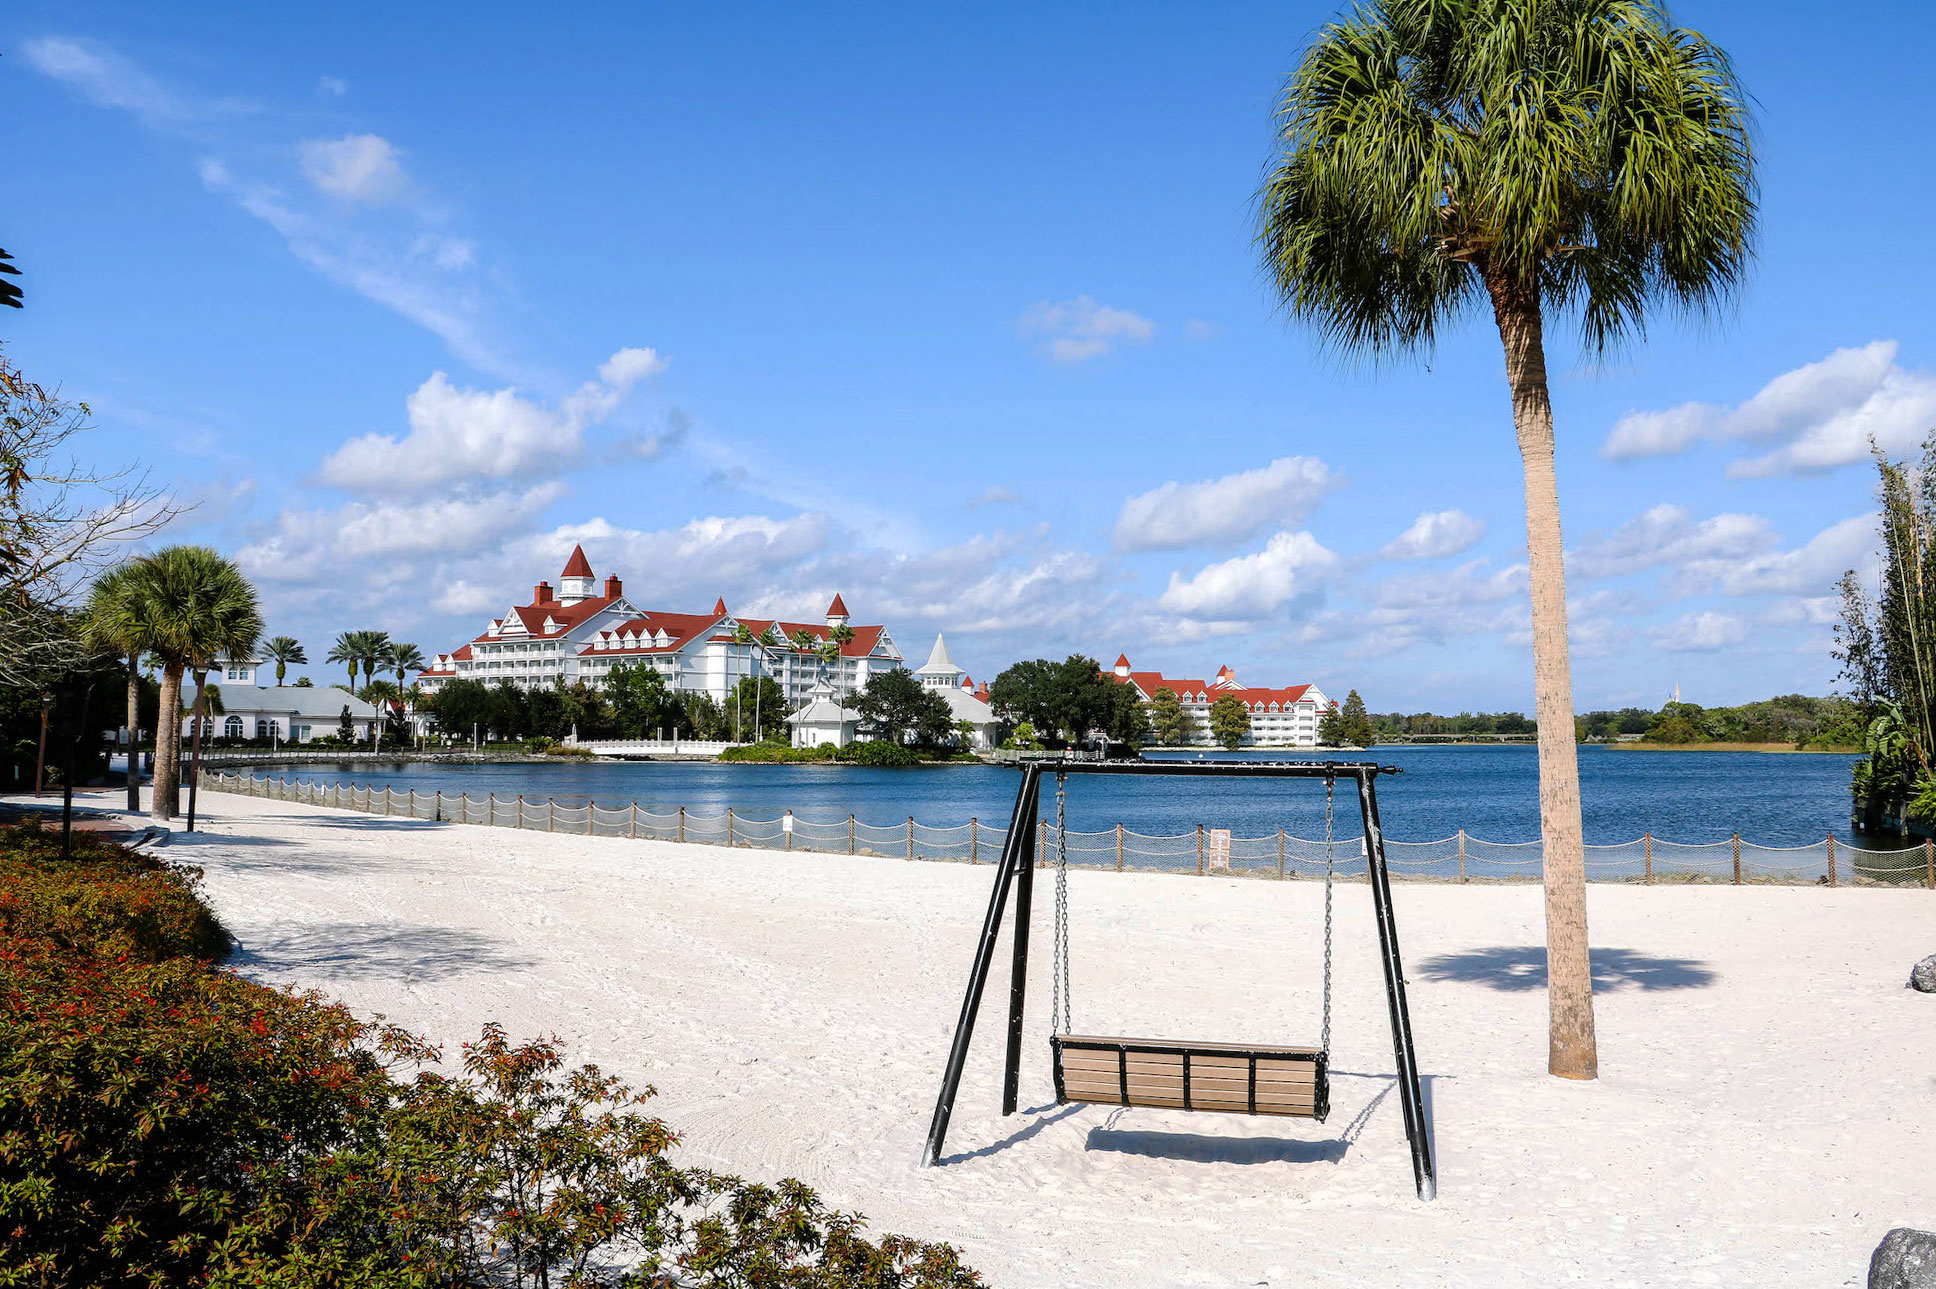 DVC's Grand Floridian view from beach